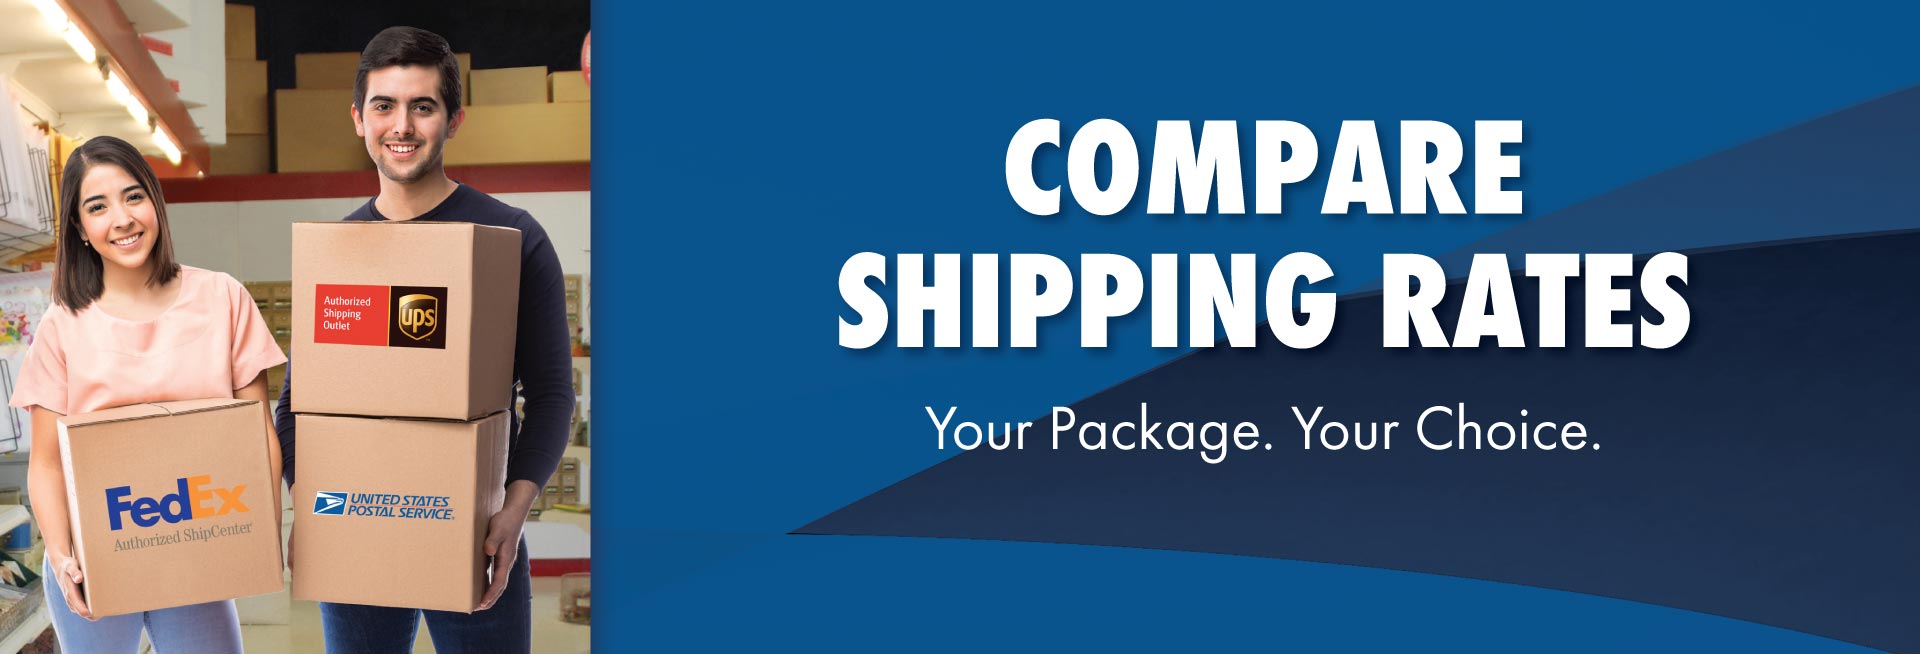 Compare Shipping Rates.